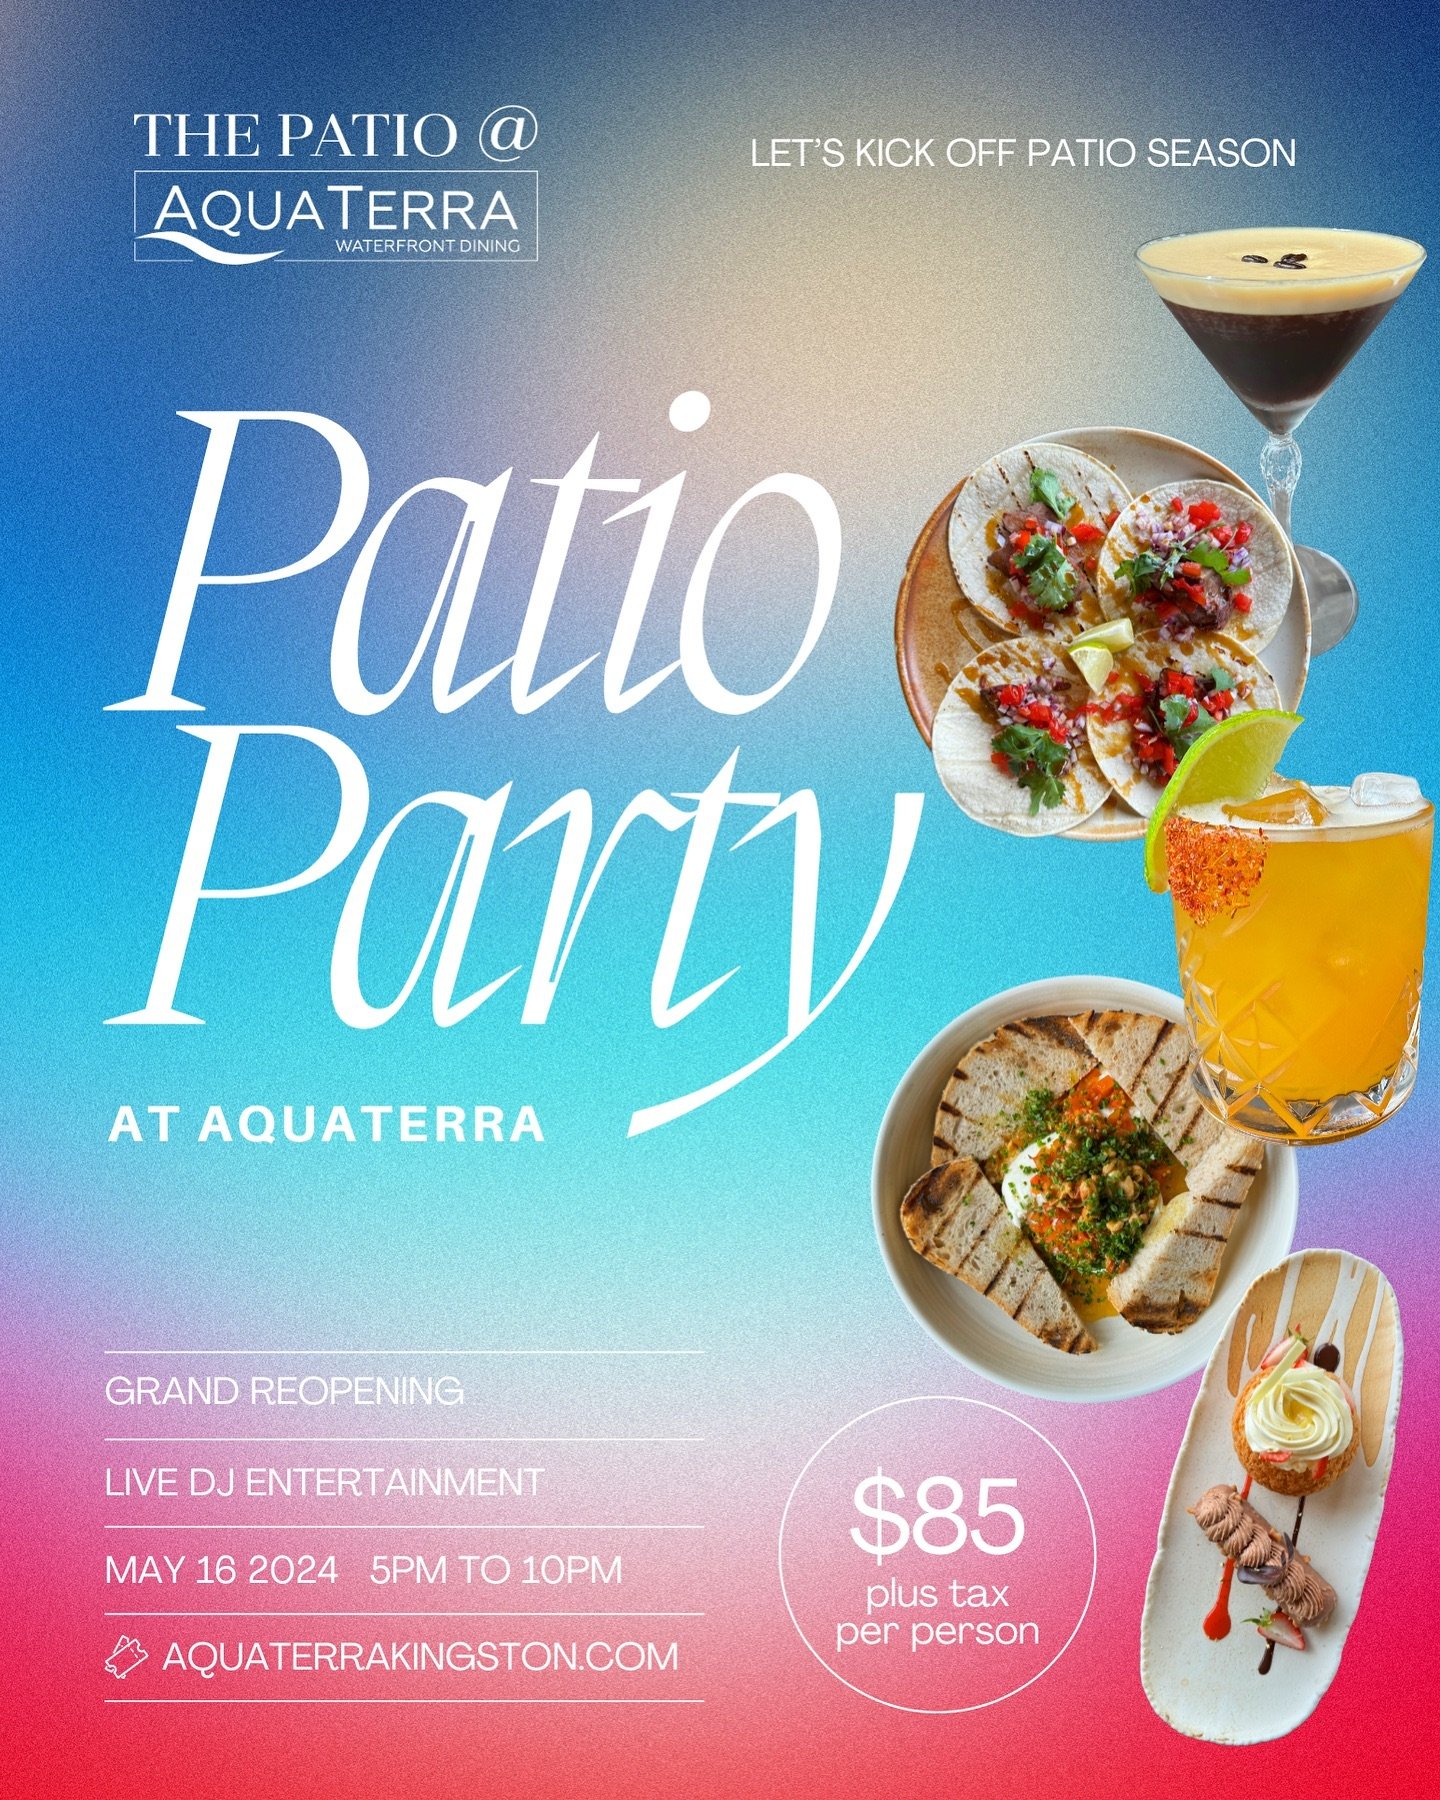 Party People listen up 📣 We&rsquo;re ringing in the summer sizzle with an epic party to kick off patio season and you&rsquo;re invited! 

Get ready for a night of mouth-watering eats, craft cocktails, and live DJ entertainment at our PATIO REOPENING